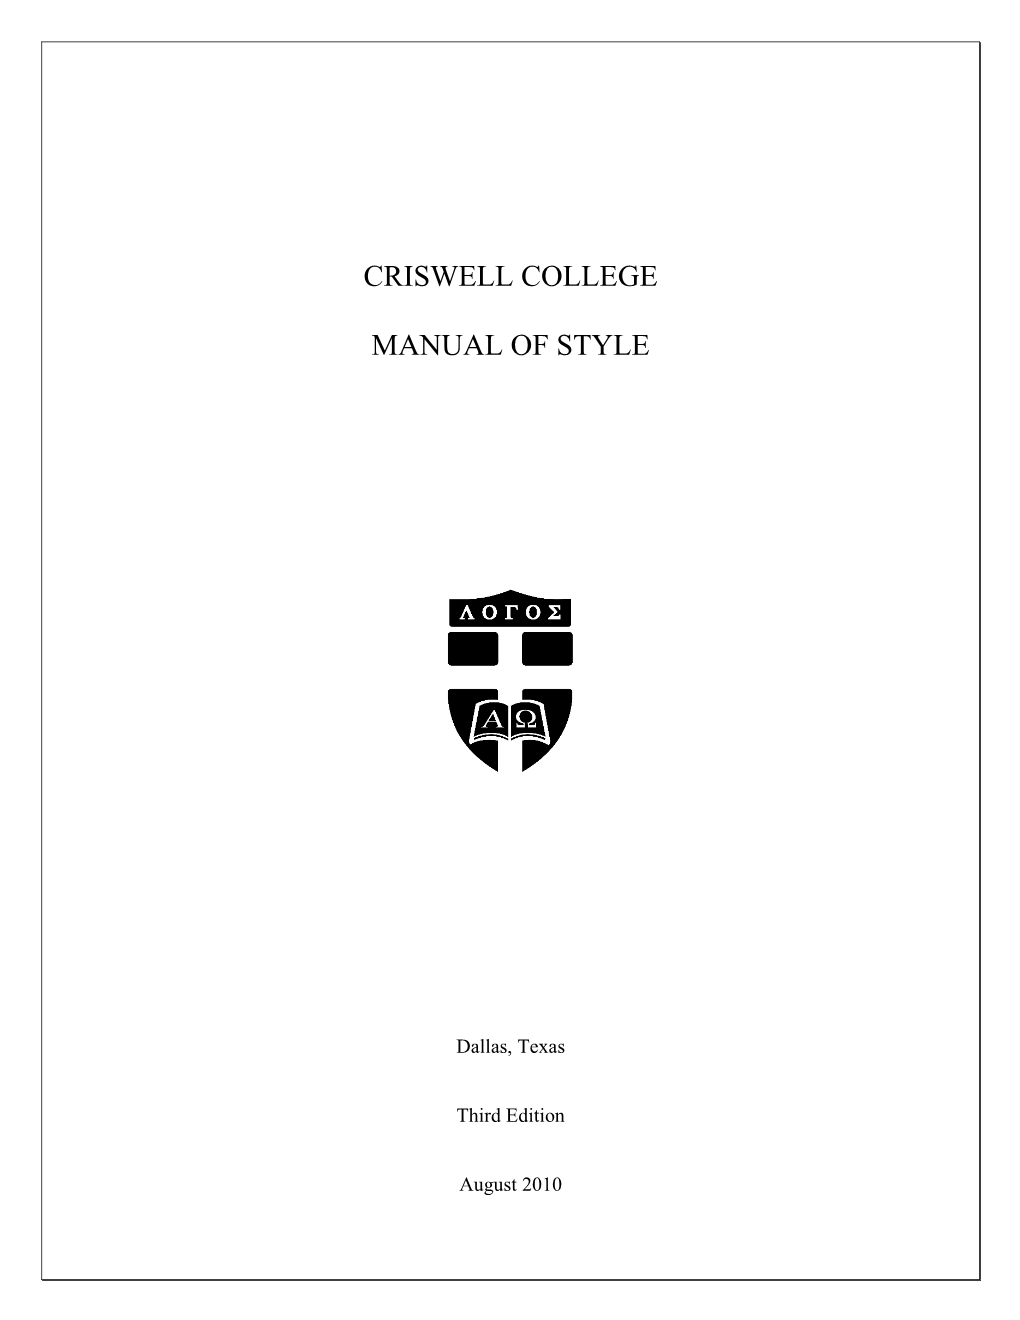 Criswell College Manual of Style (August 2010)